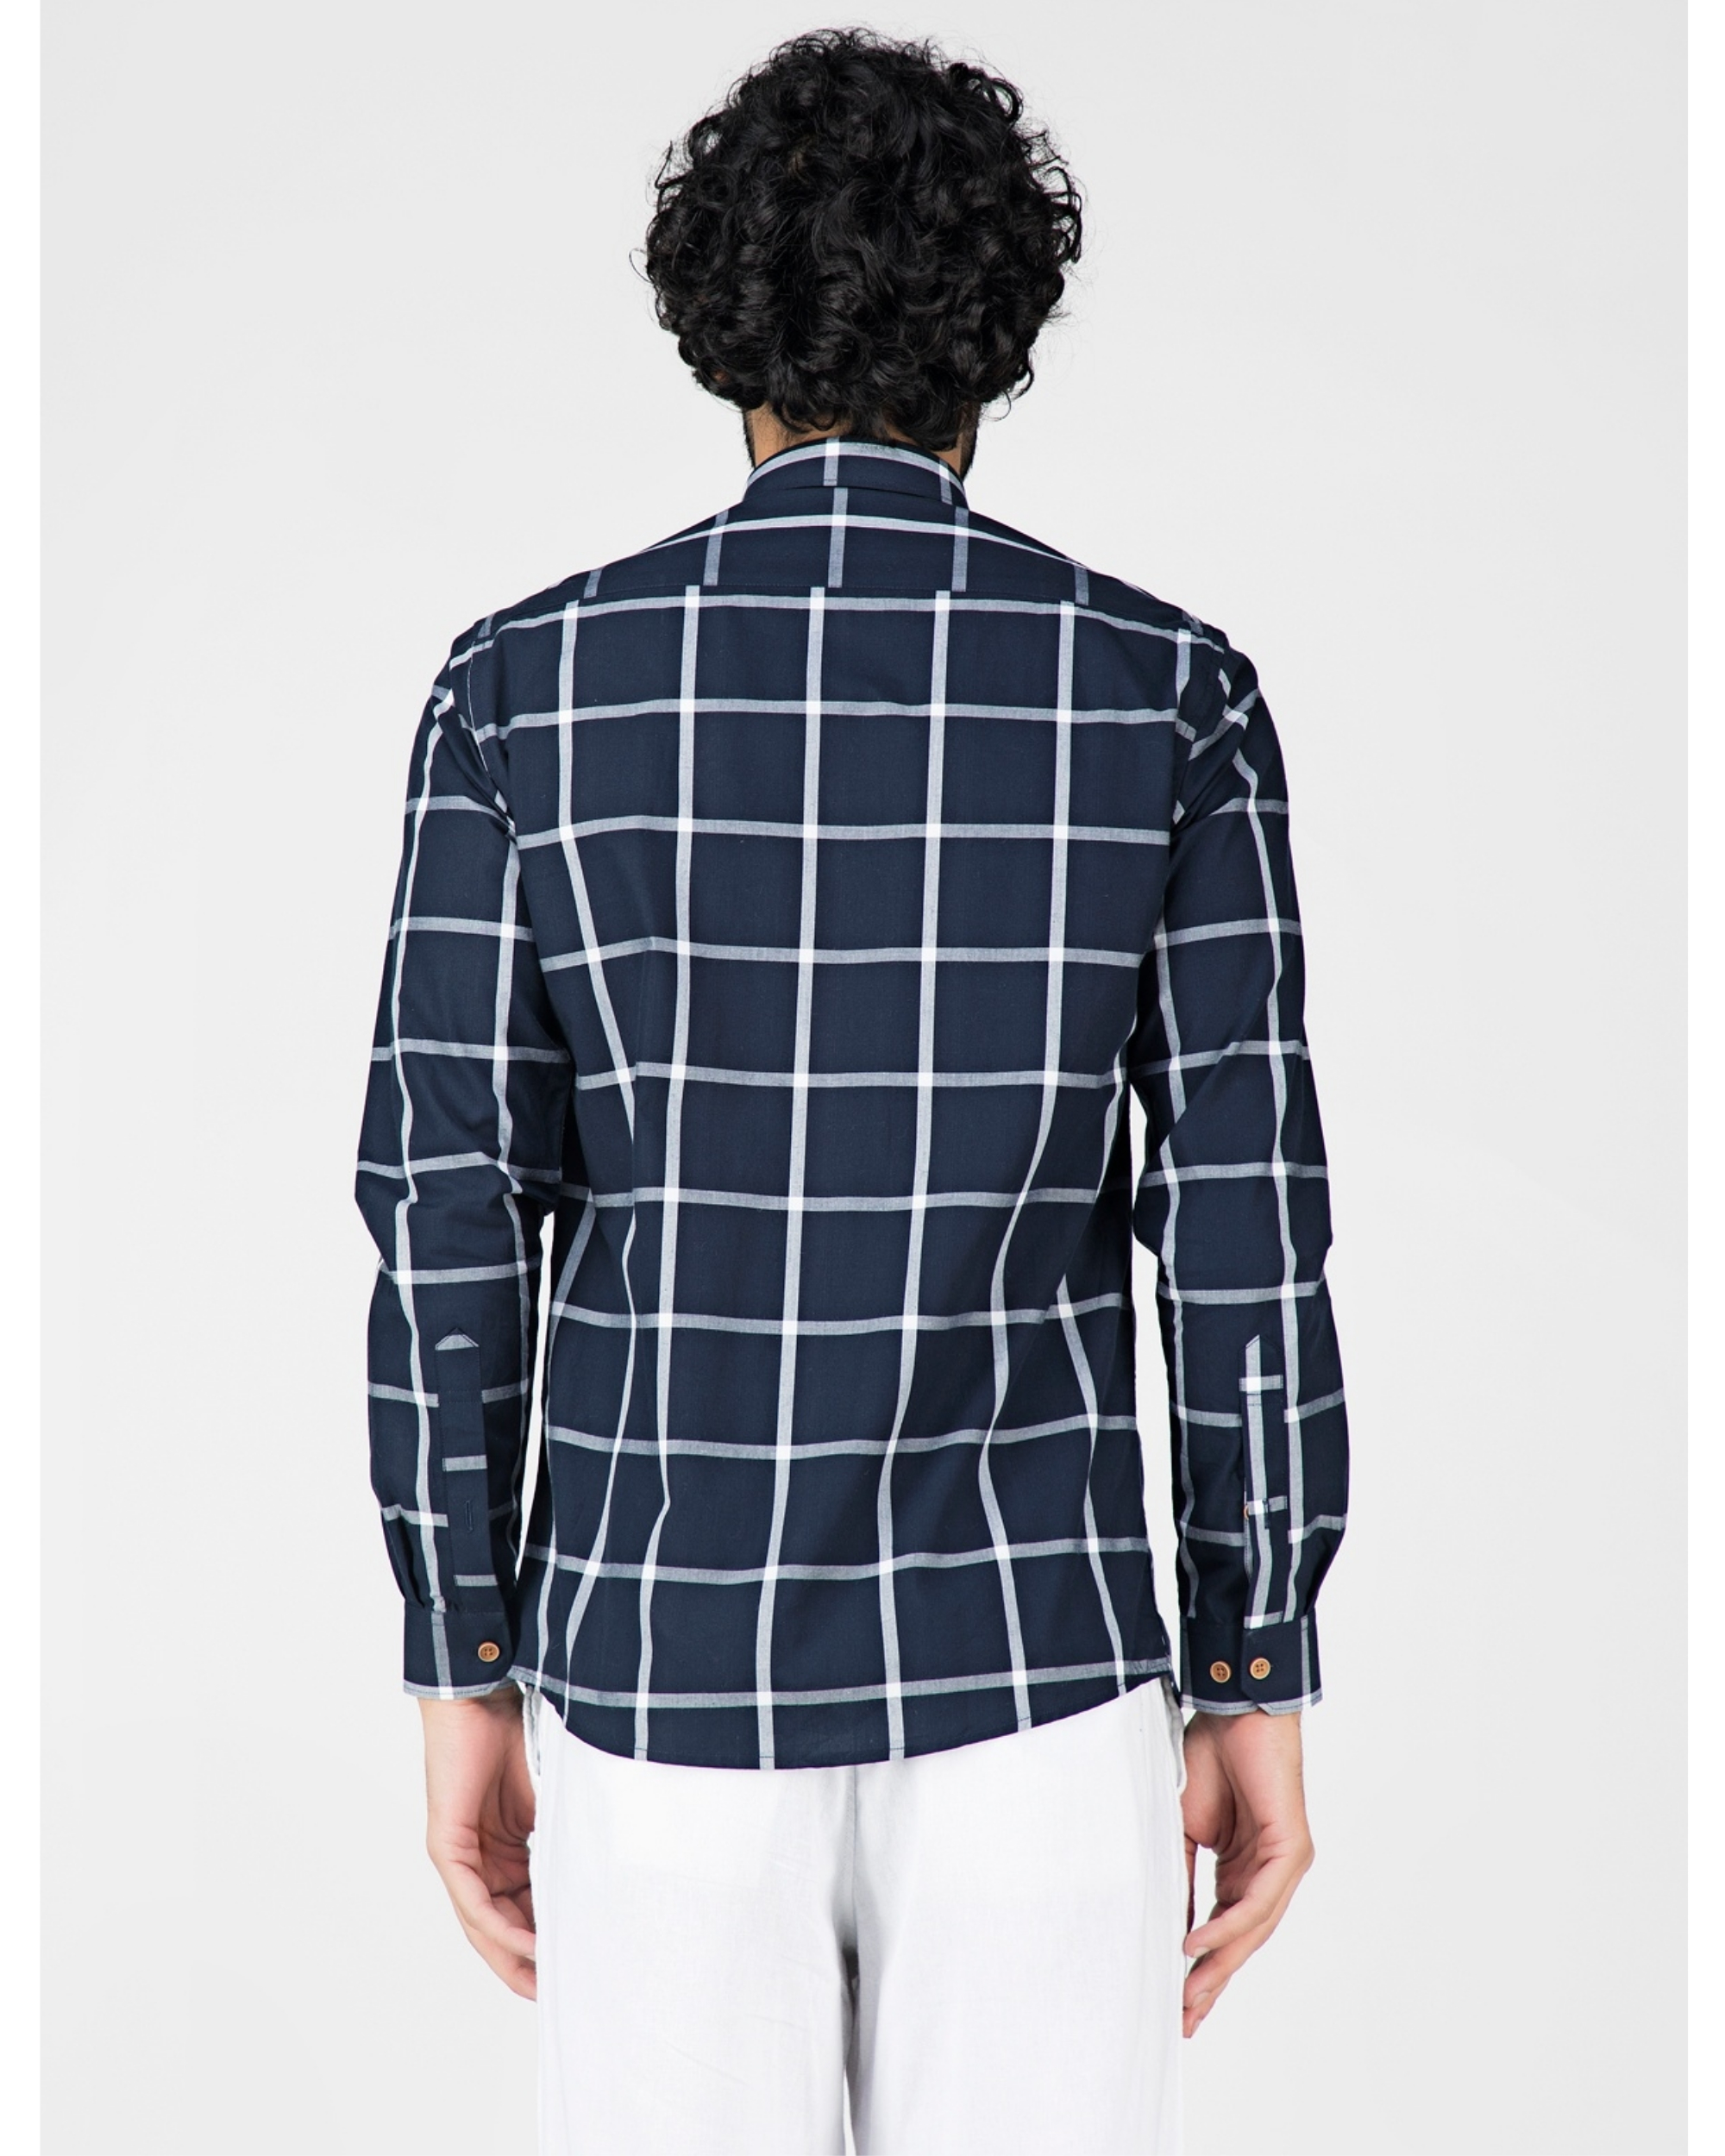 Navy blue and white window pane checkered shirt by Green Hill | The ...